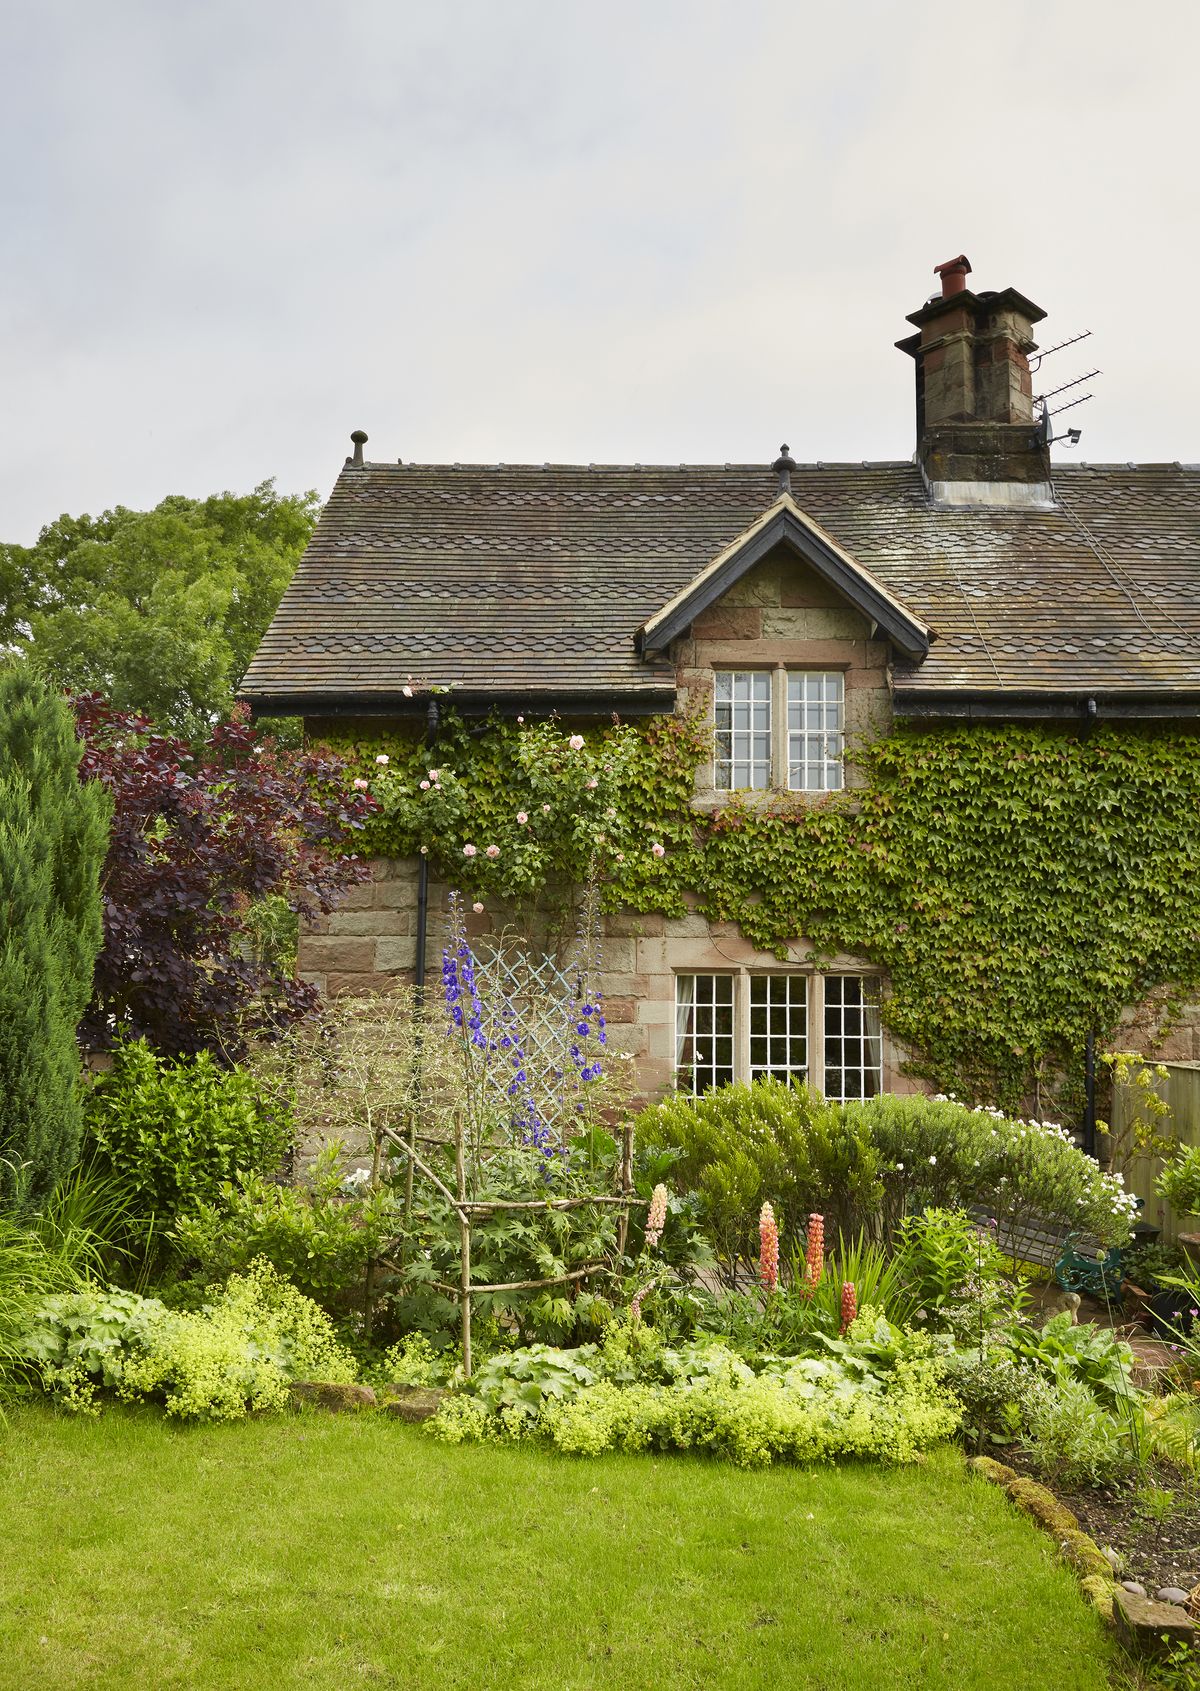 Real home: a pretty farm cottage sees an Arts & Crafts inspired